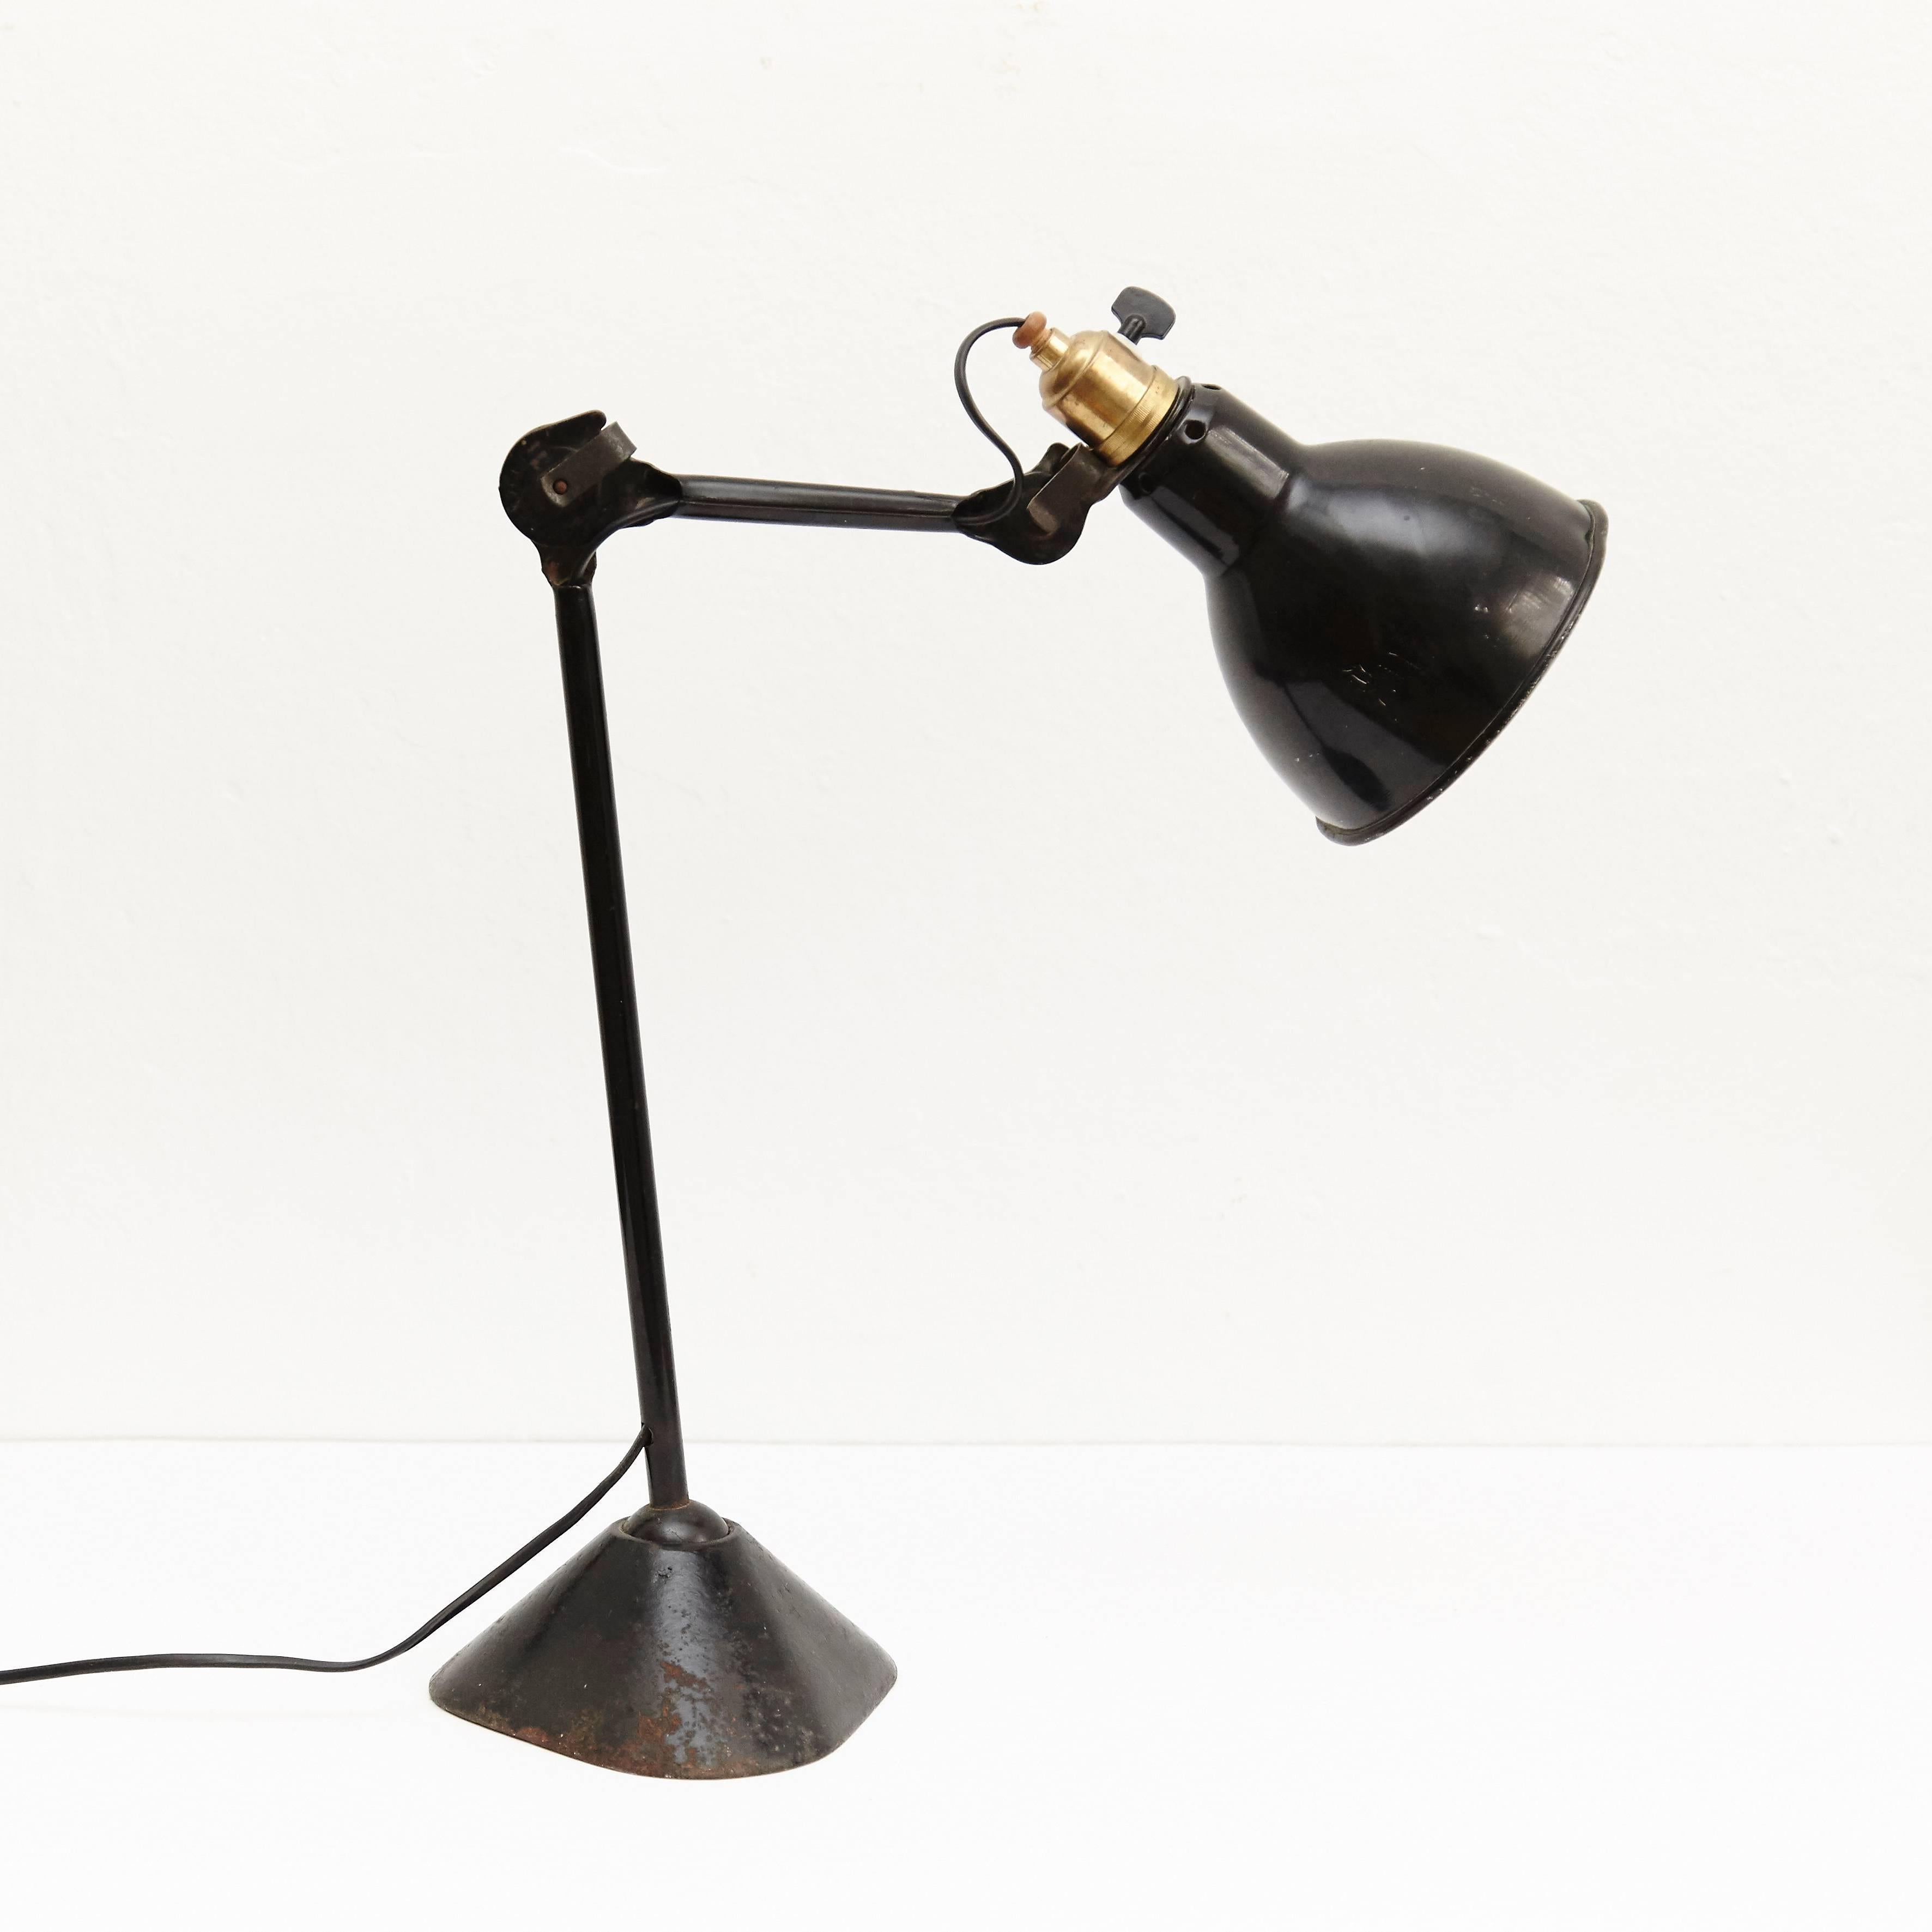 Table lamp designed by Bernard-Albin Gras.
Manufactured by Gras (France) circa 1930.
Aluminium and steel.

In good original condition, with minor wear consistent with age and use, preserving a beautiful patina.

In 1922 Bernard-Albin Gras